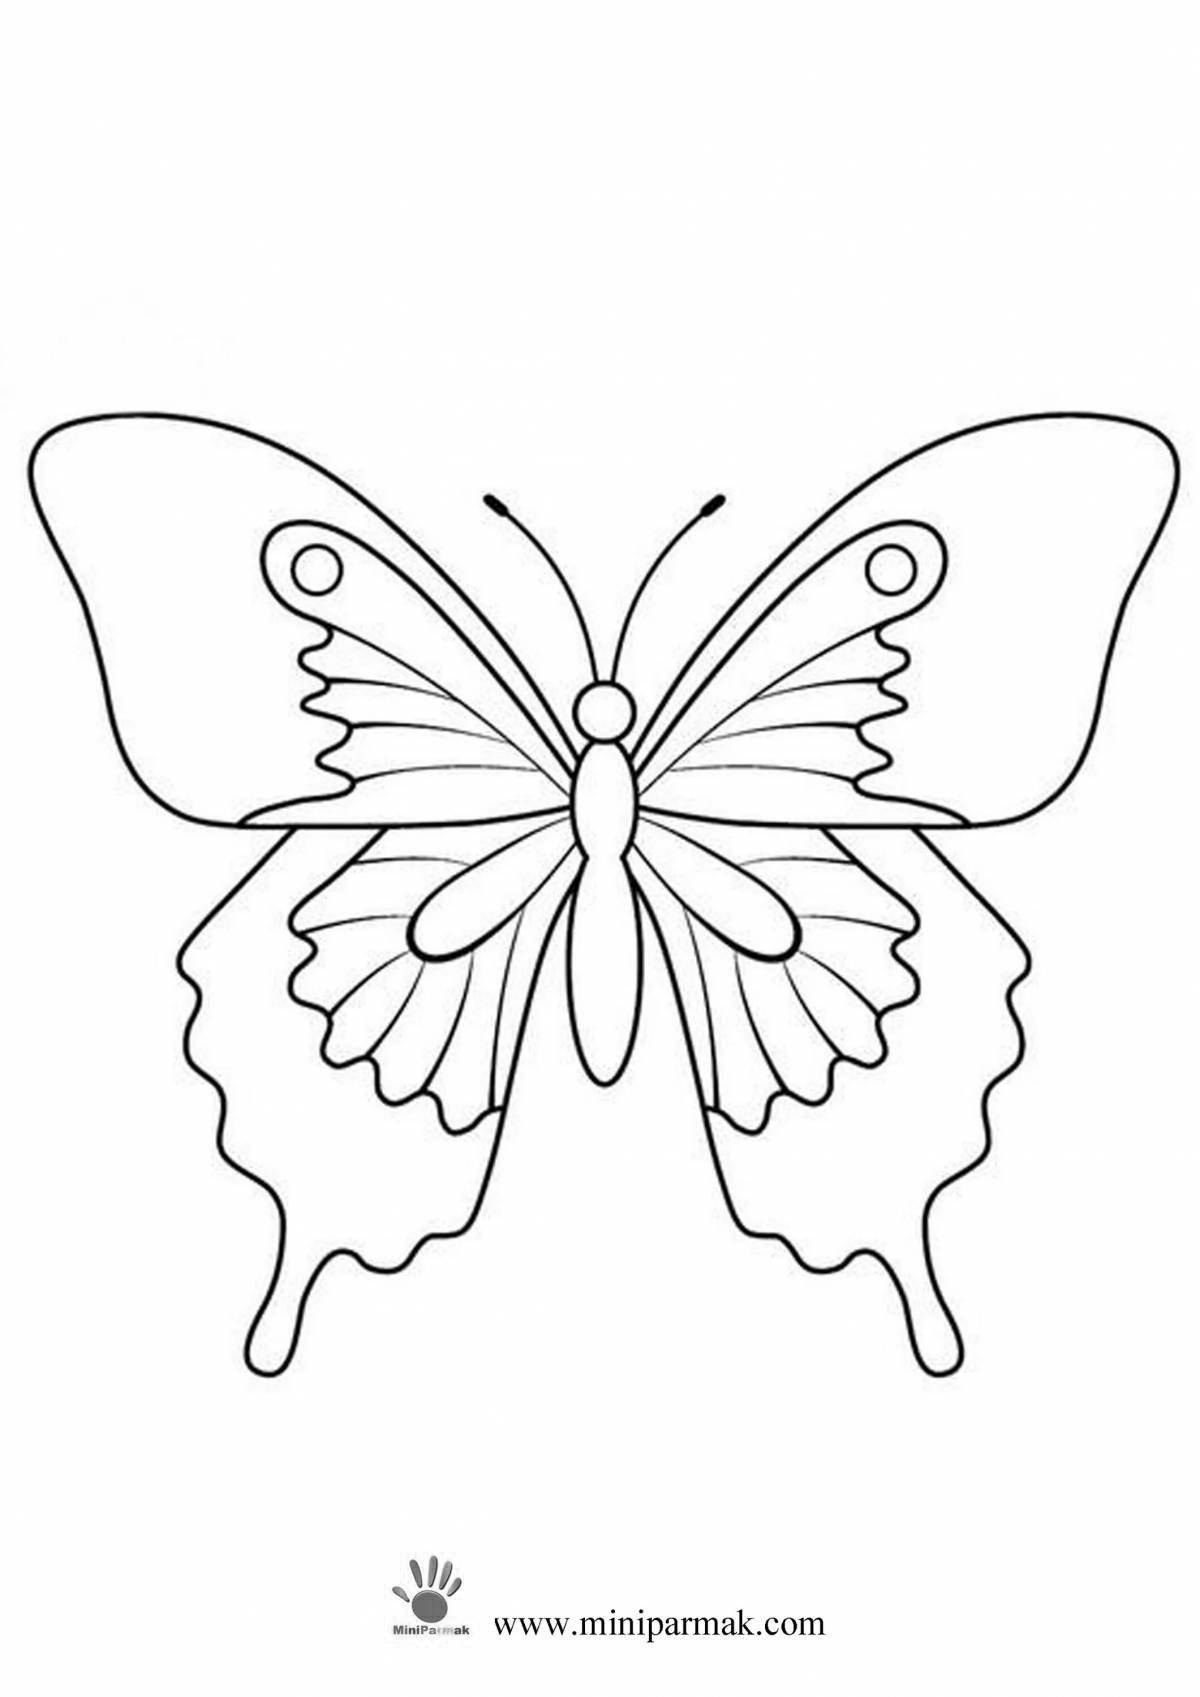 Adorable Butterfly Stencil Coloring Page